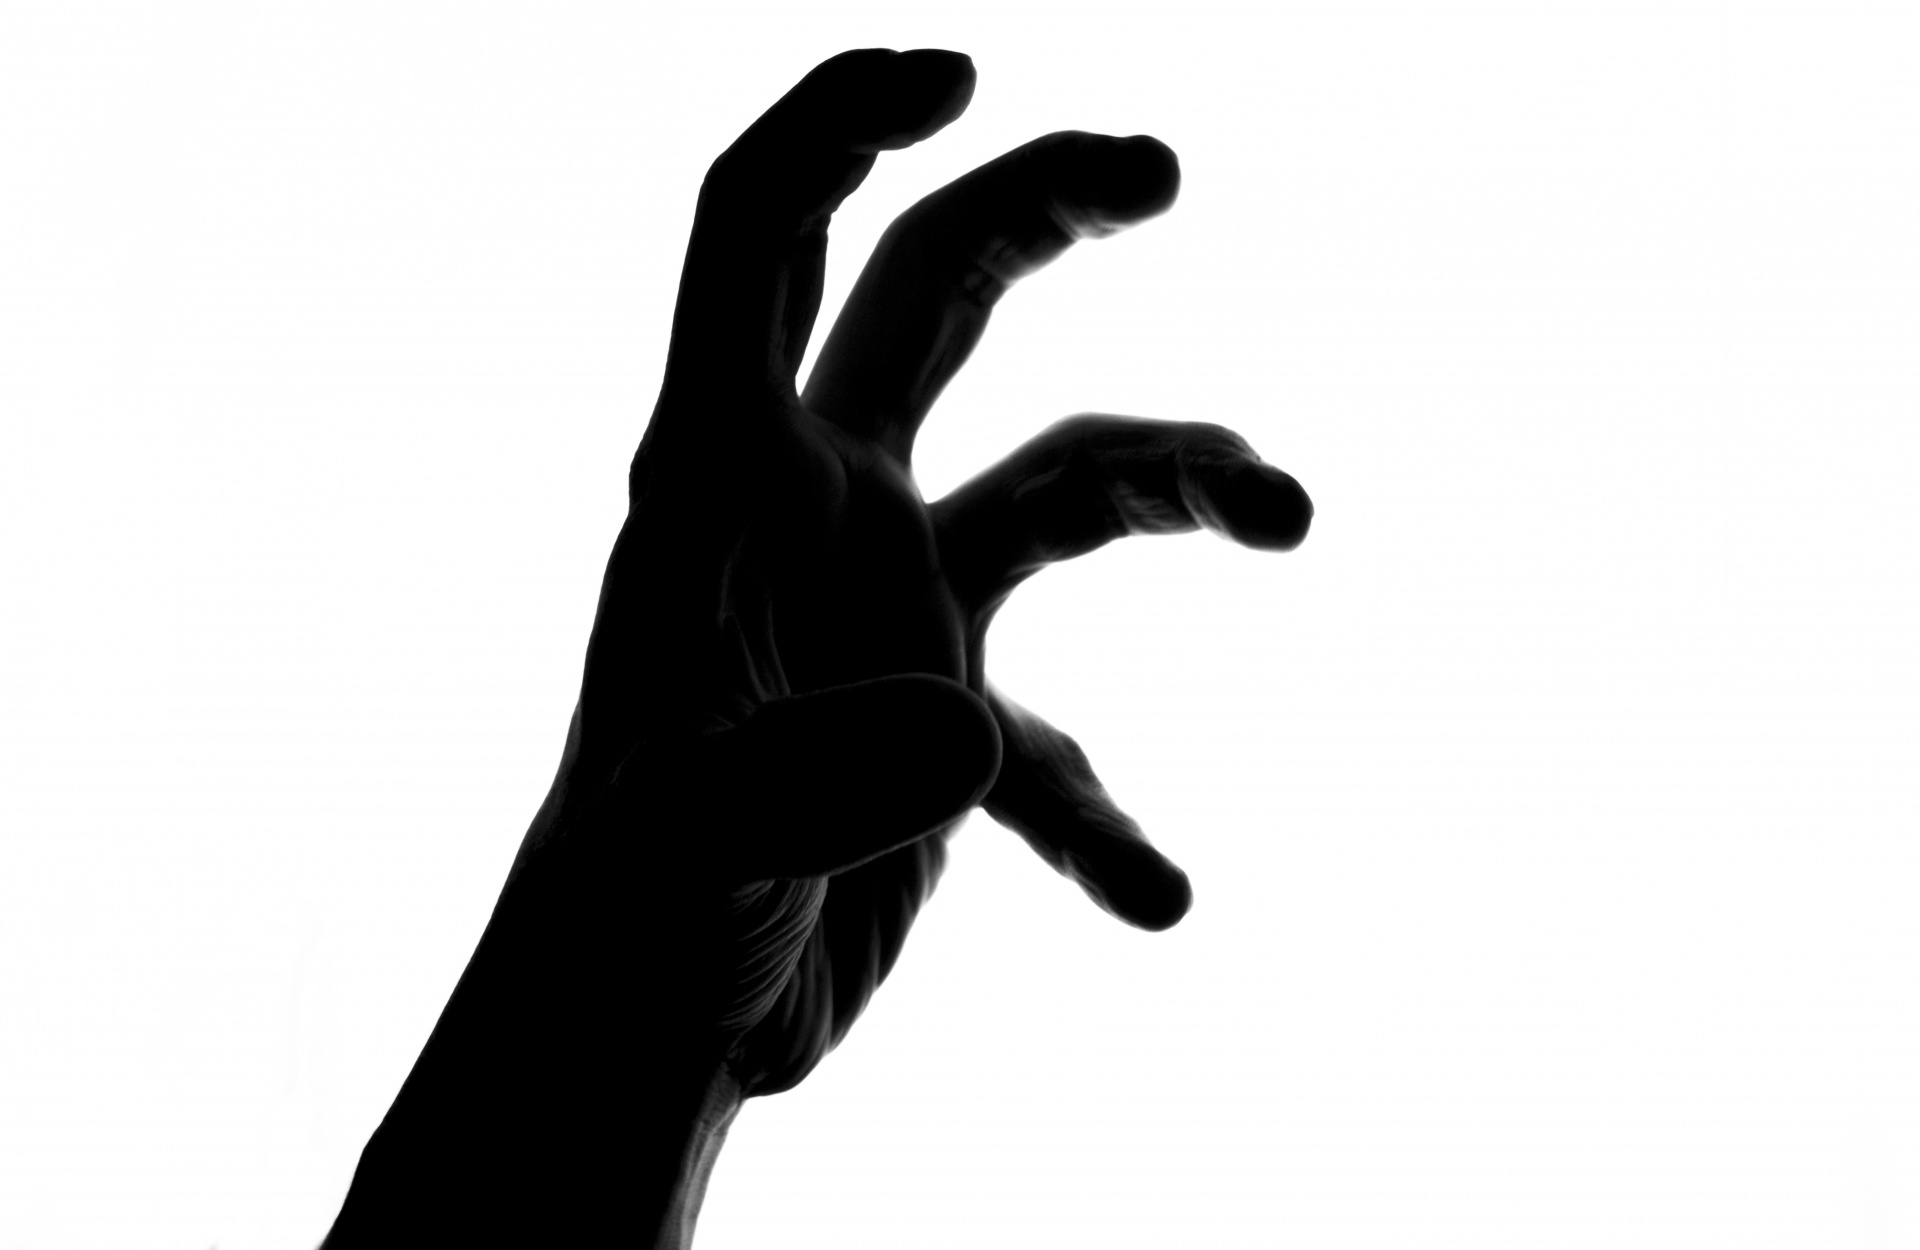 Silhouette Of Scary Hand